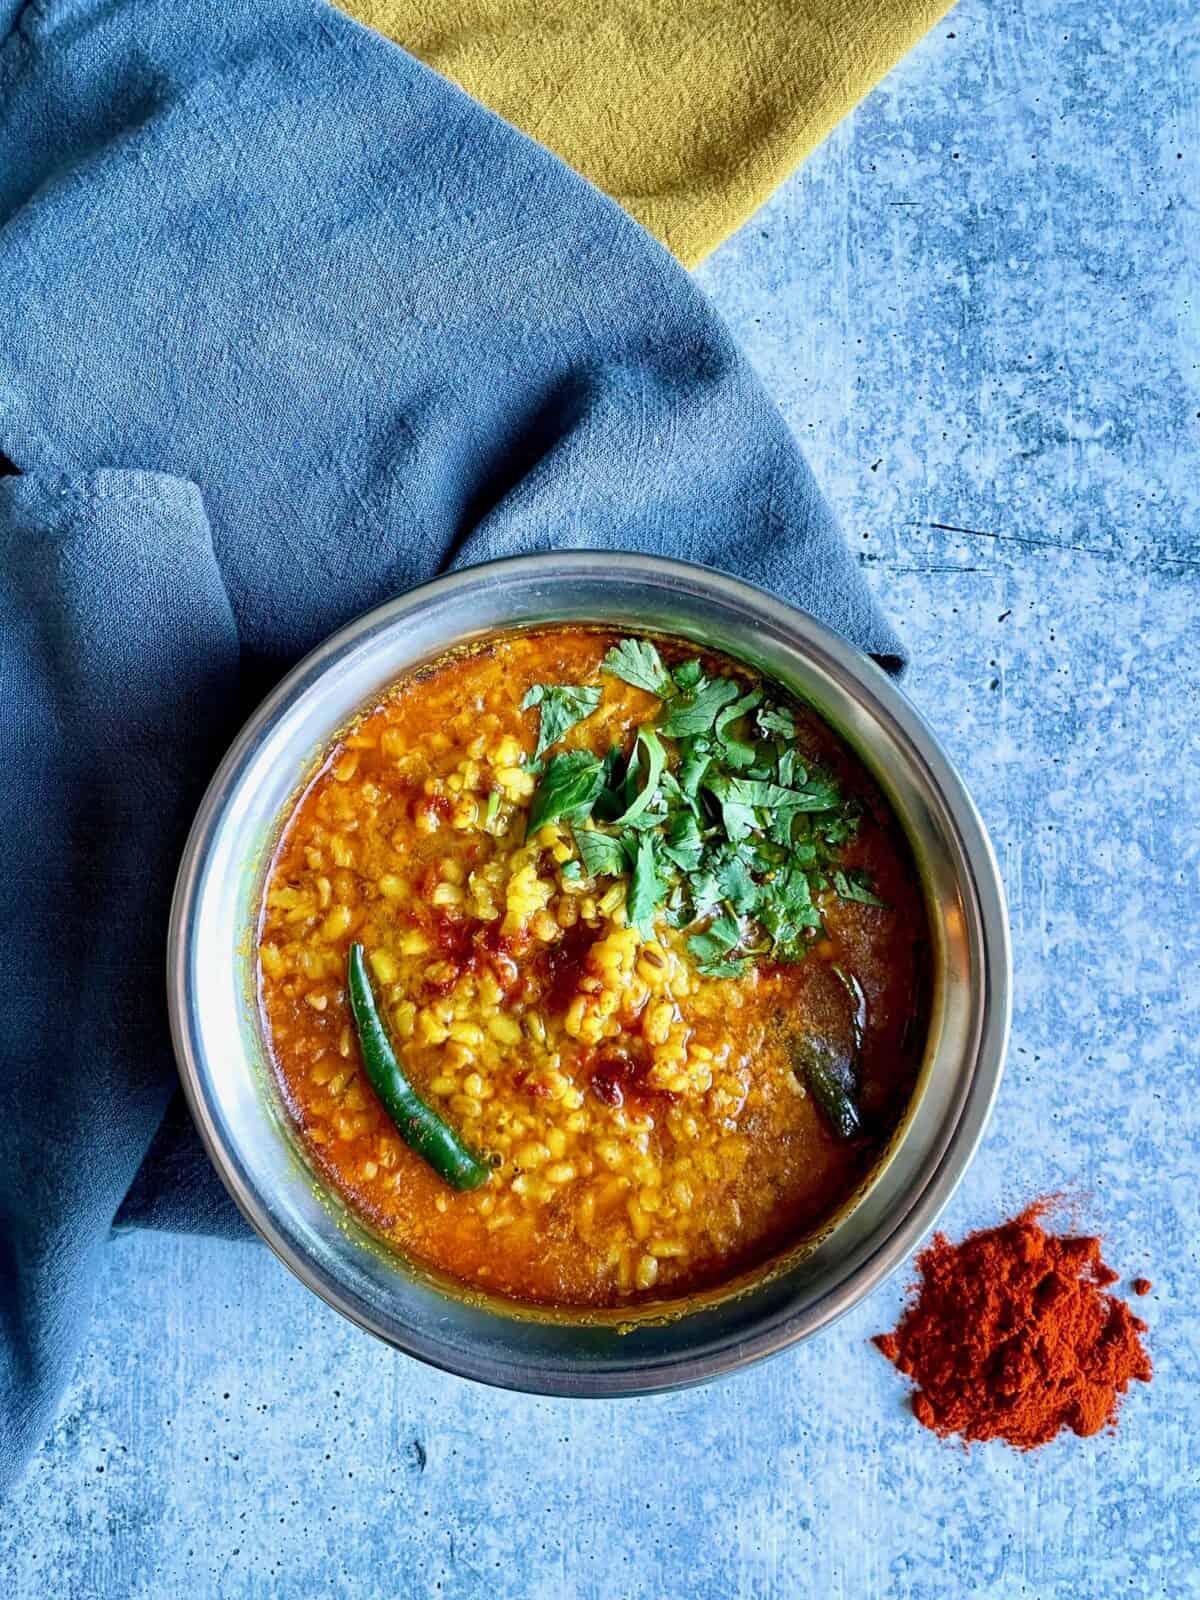 Bengali Moong Dal or Bhaja Moonger Daal in bowl, kashmiri chili powder on the lower right and grey and mustard-colred towels underneath.